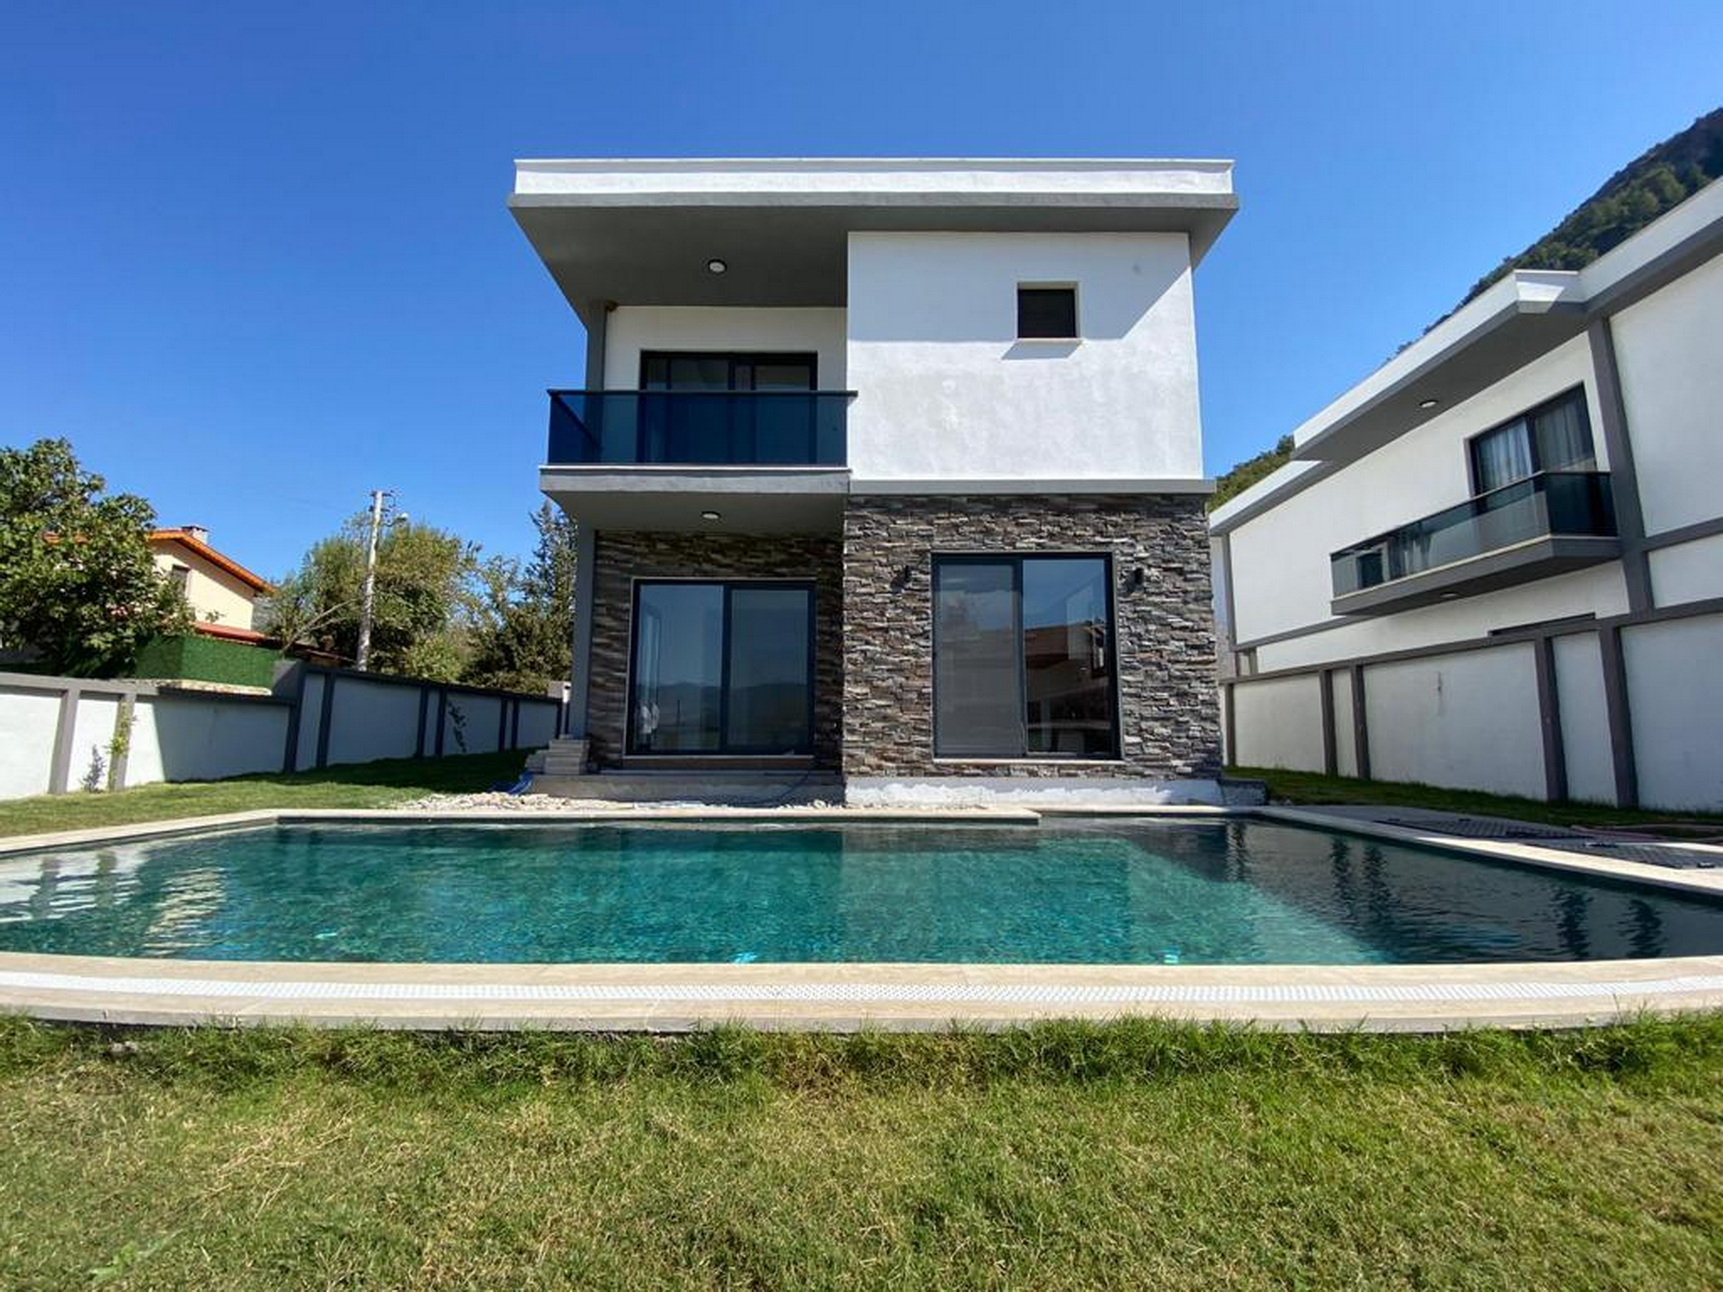 5 Bedroom Brand New Detached Villa with Swimming Pool